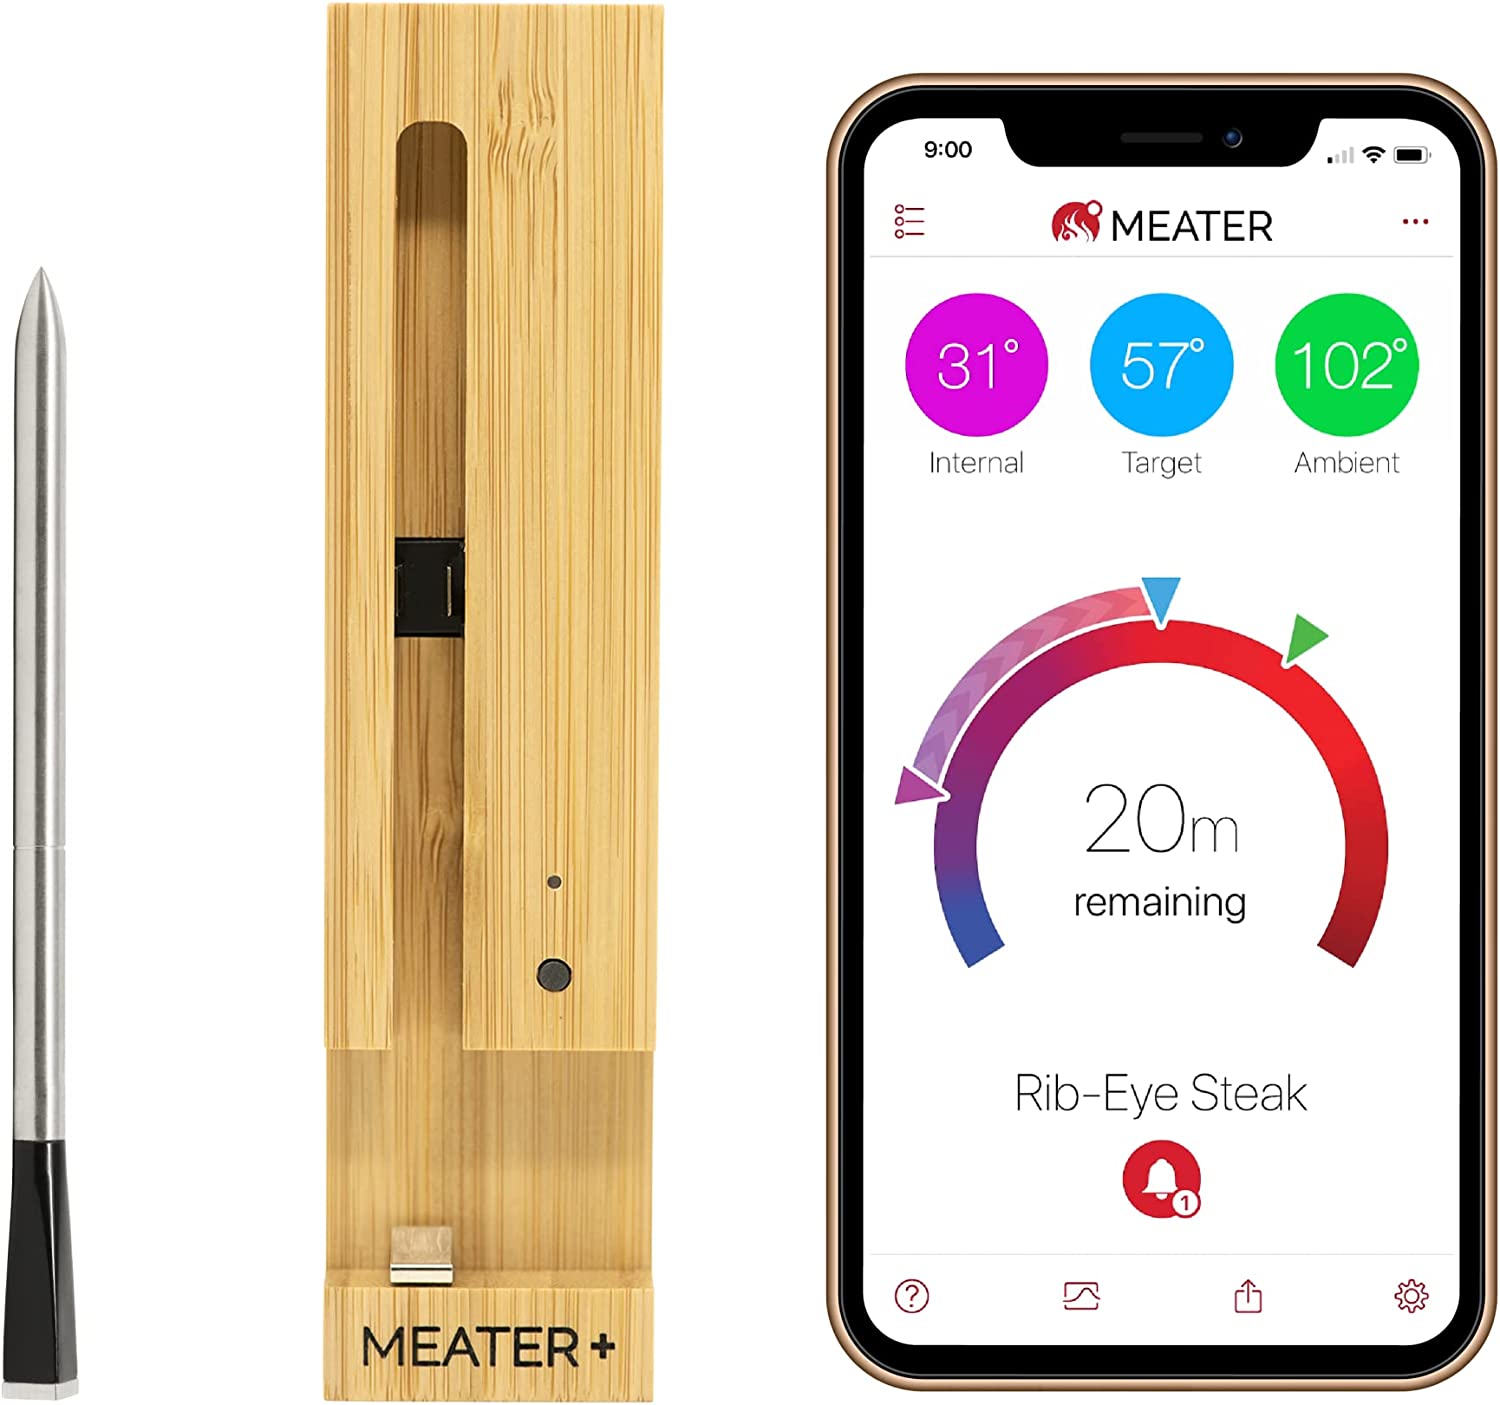 Meater plus smart meat Thermometer showing the thermometer and app on phone